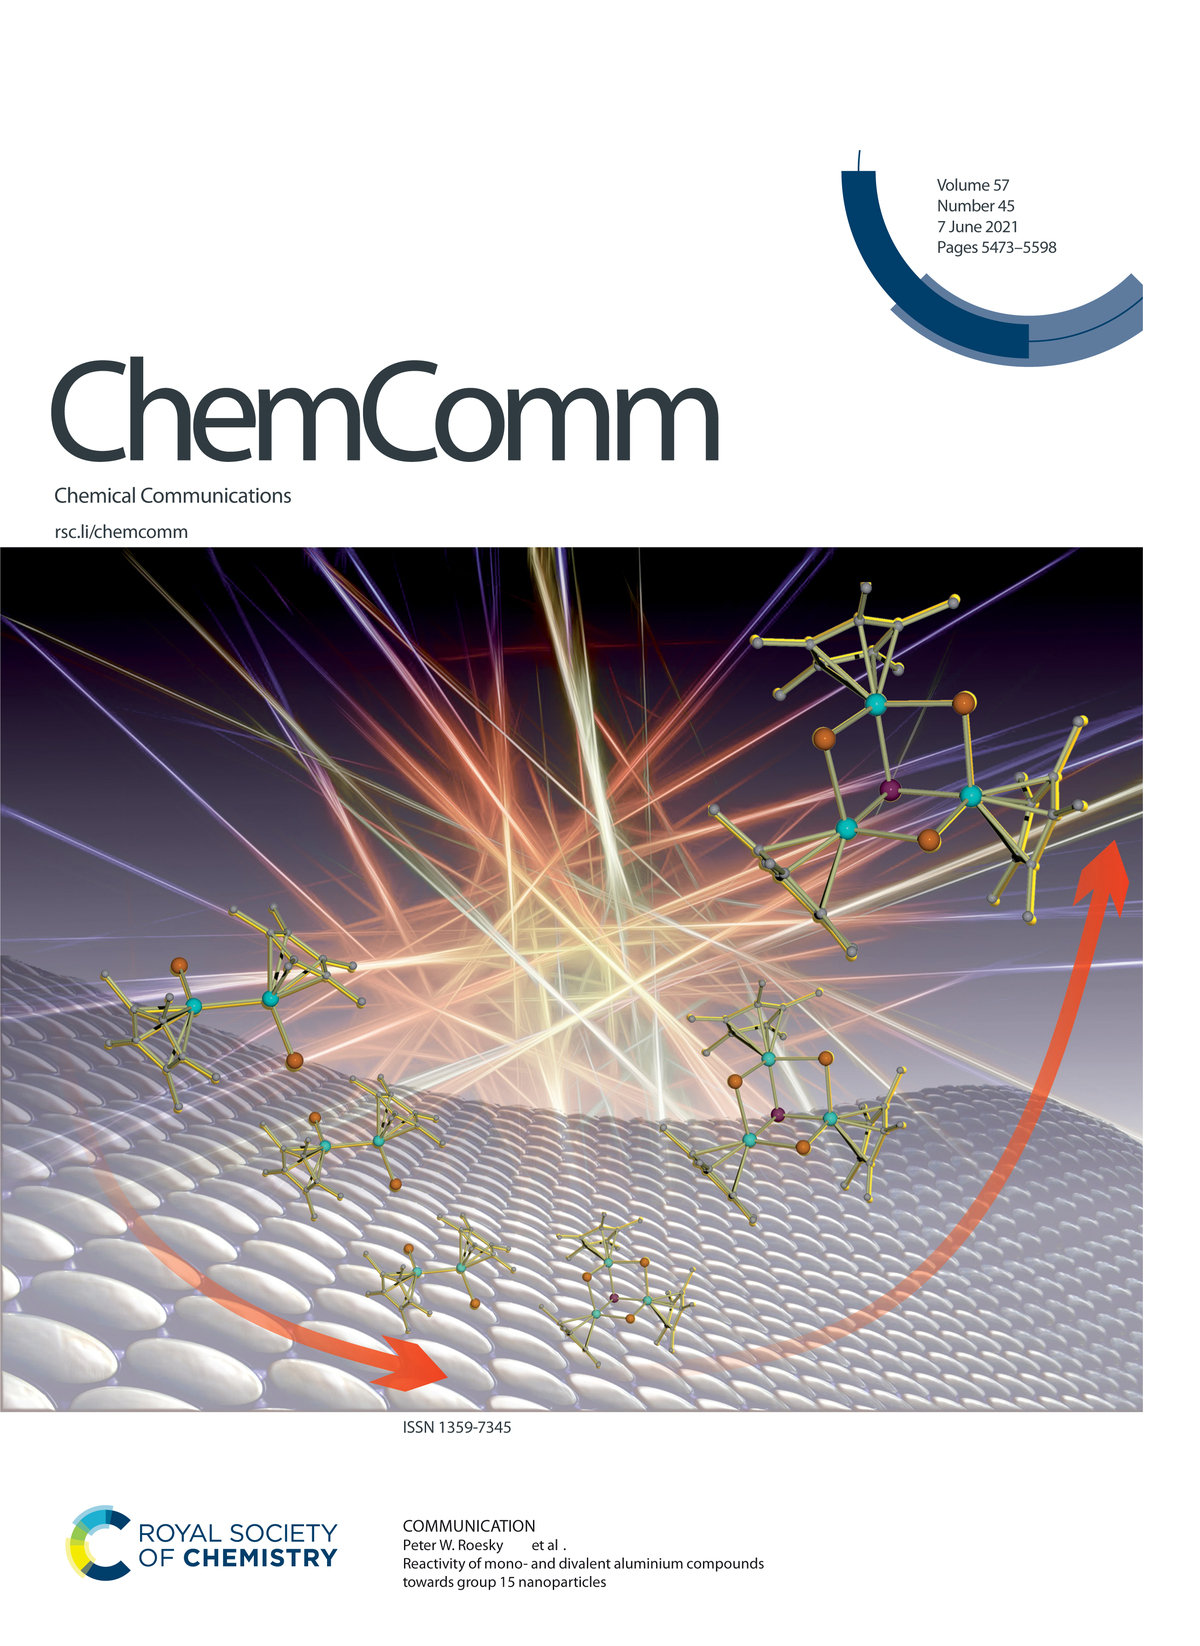 Cover picture chemica communications june 2021